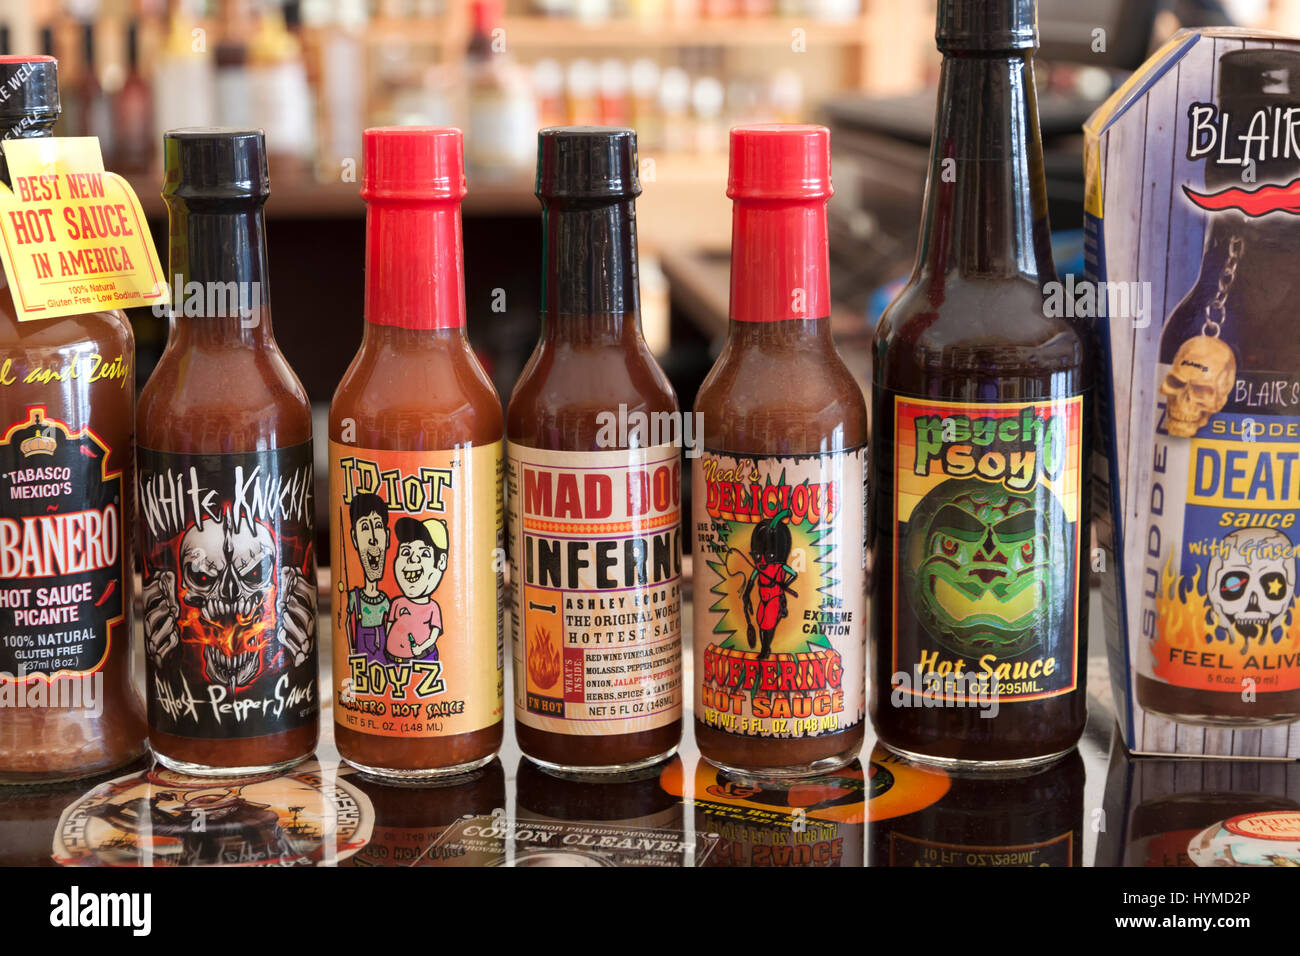 Hot, spicy, savory bottled sauces on display in a store in Key West, Florida, USA. Stock Photo